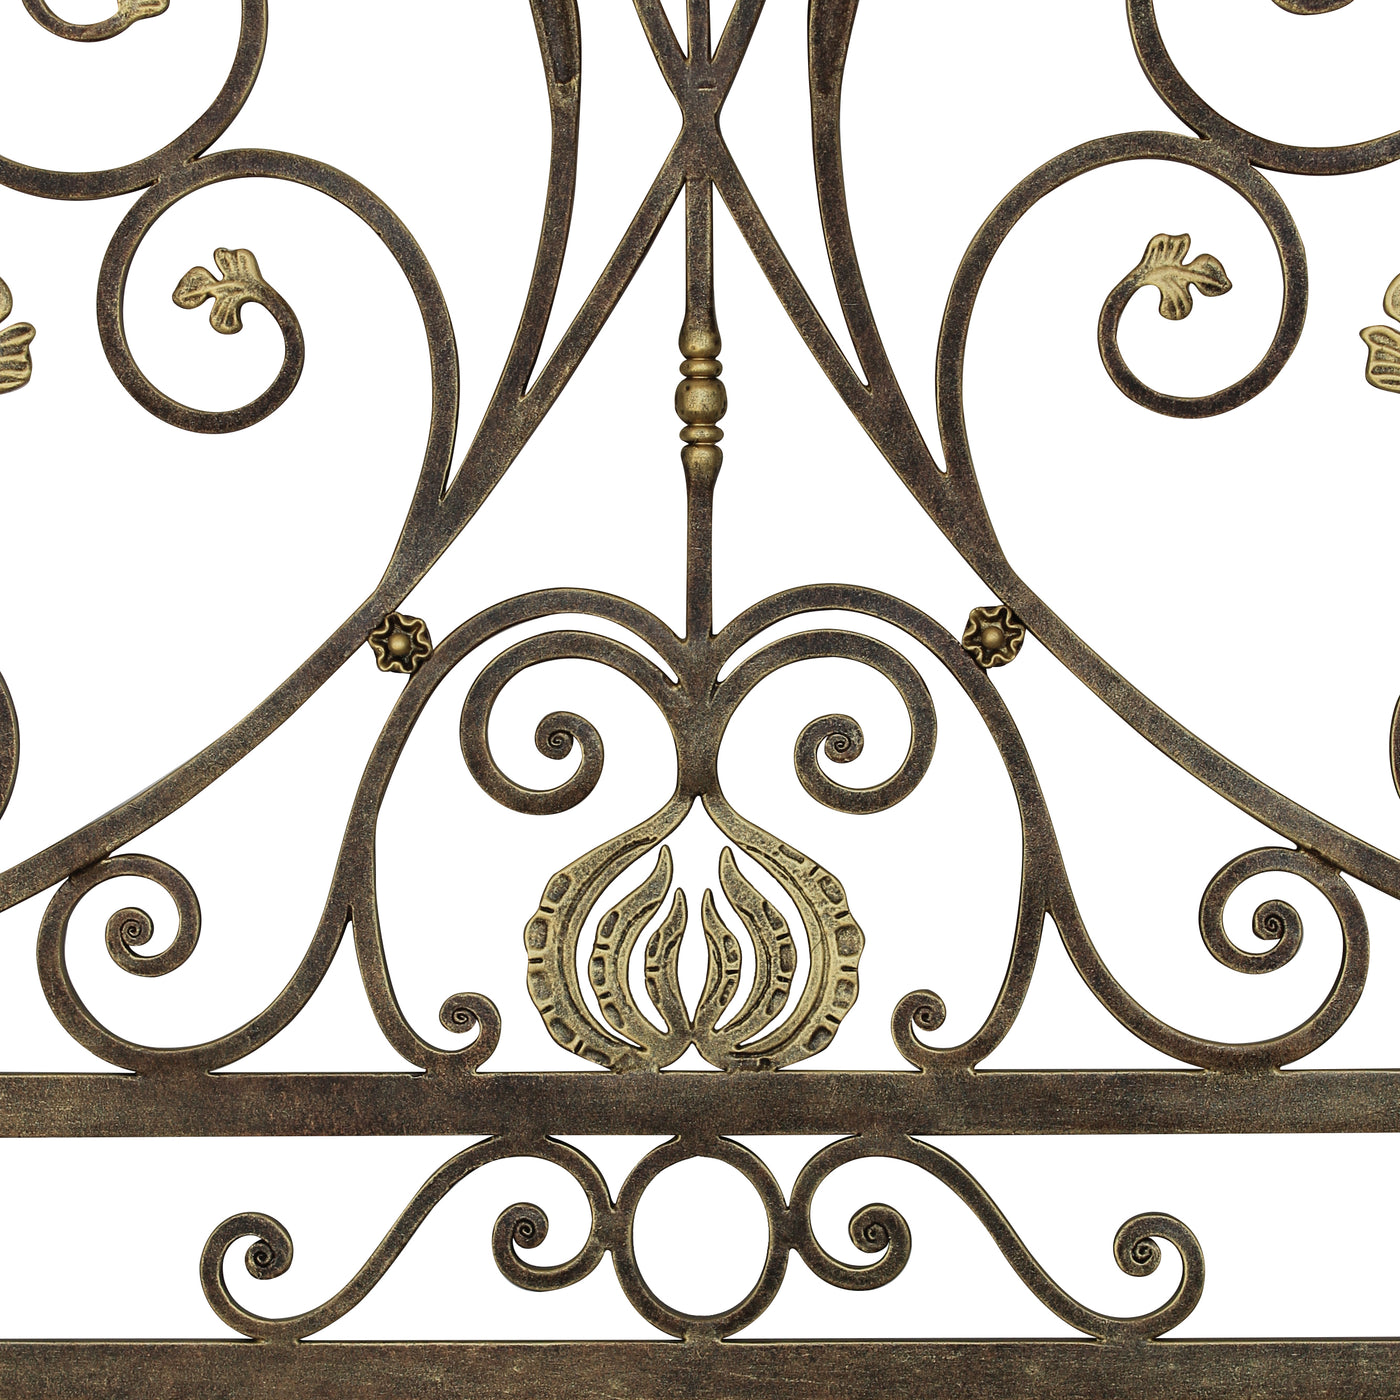 Close up of an Art Nouveau inspired metal headboard made up of scrolls and leaves, painted in an antique bronze finish